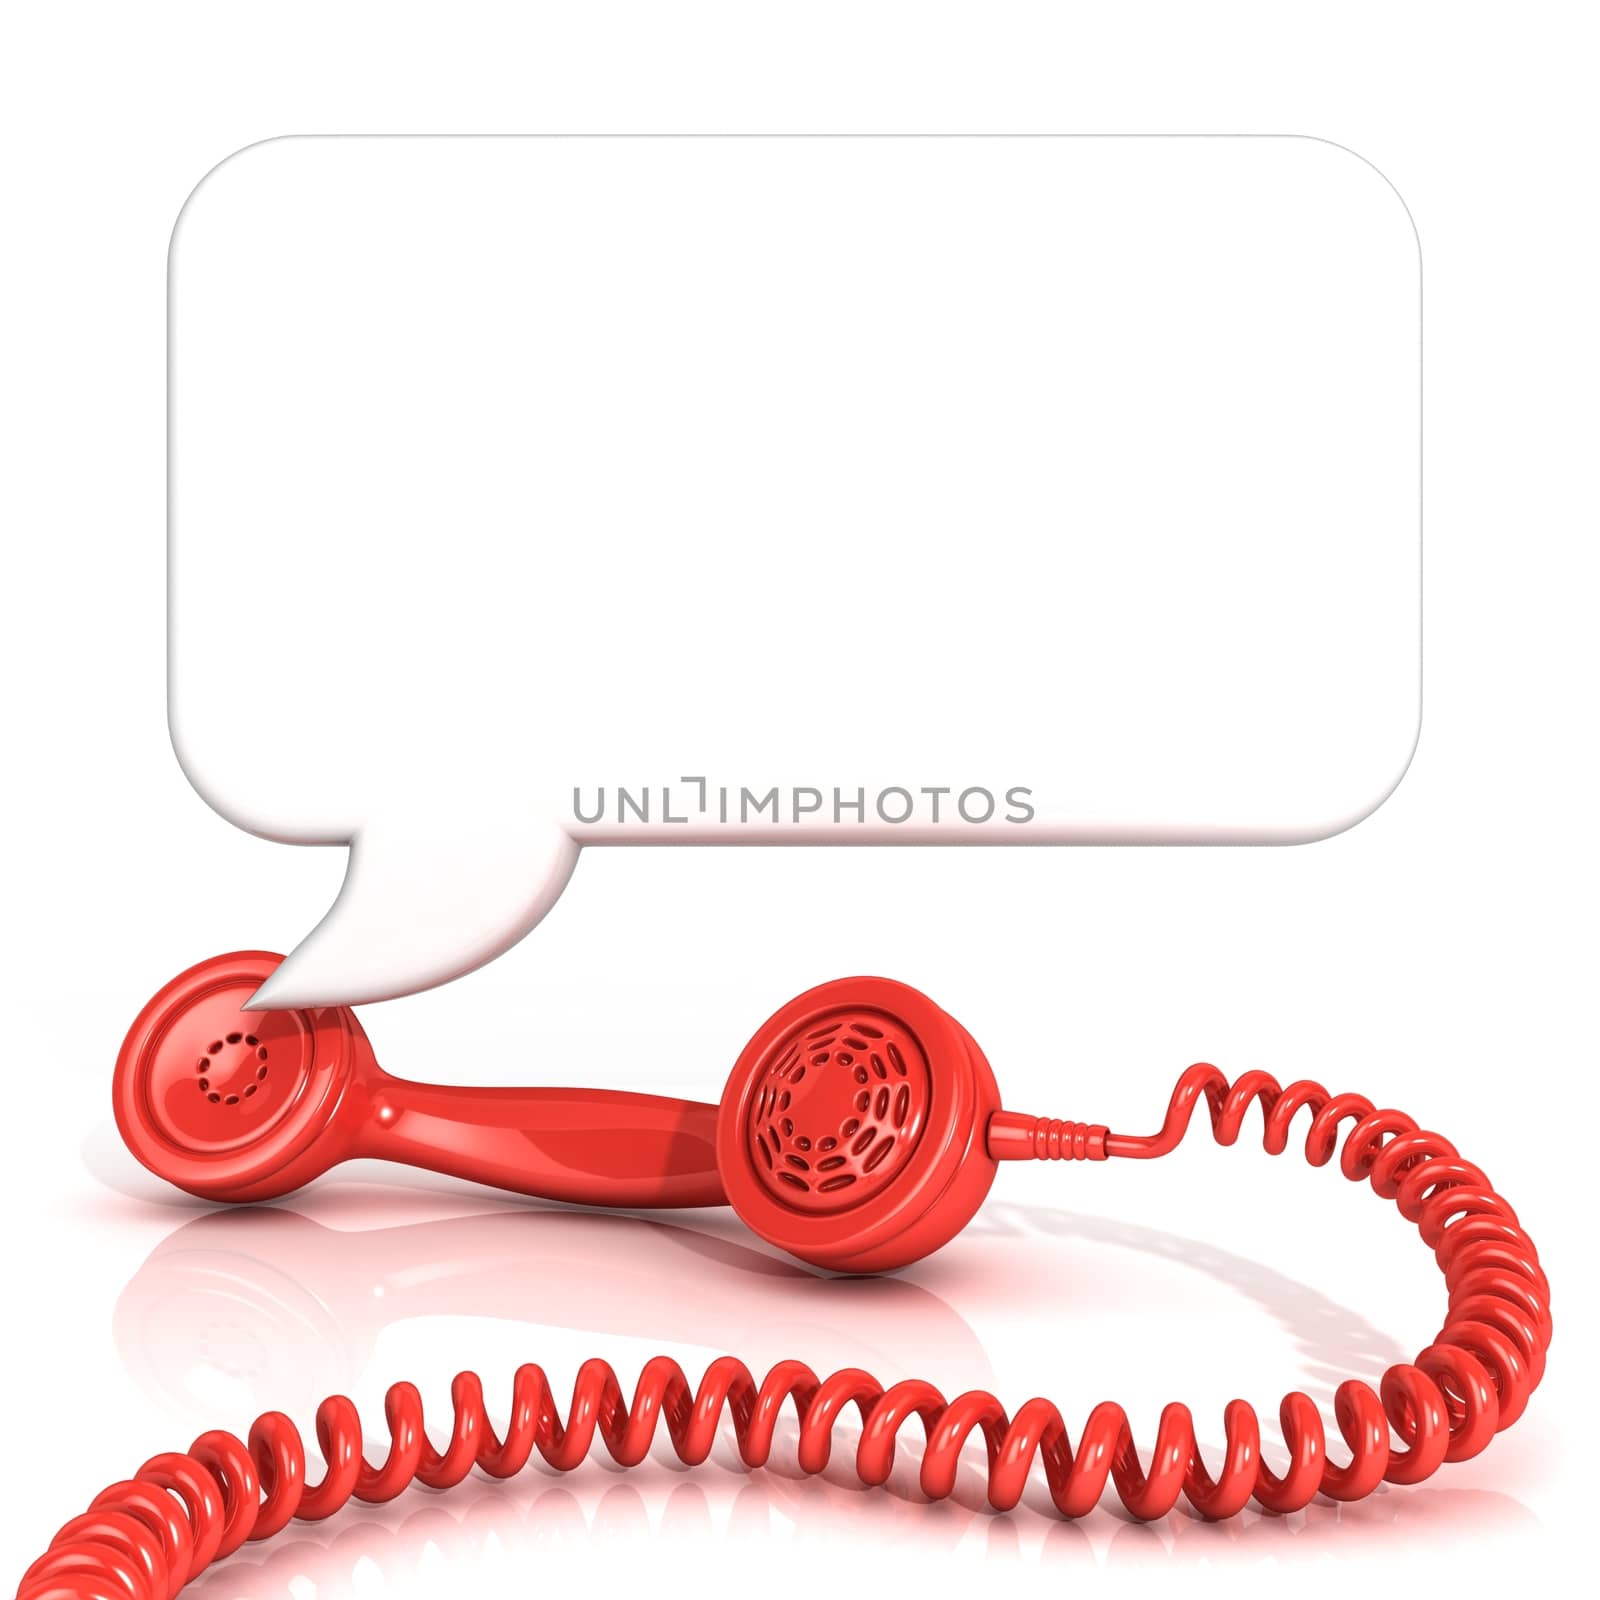 Red old fashion telephone handsets and speech bubble by djmilic